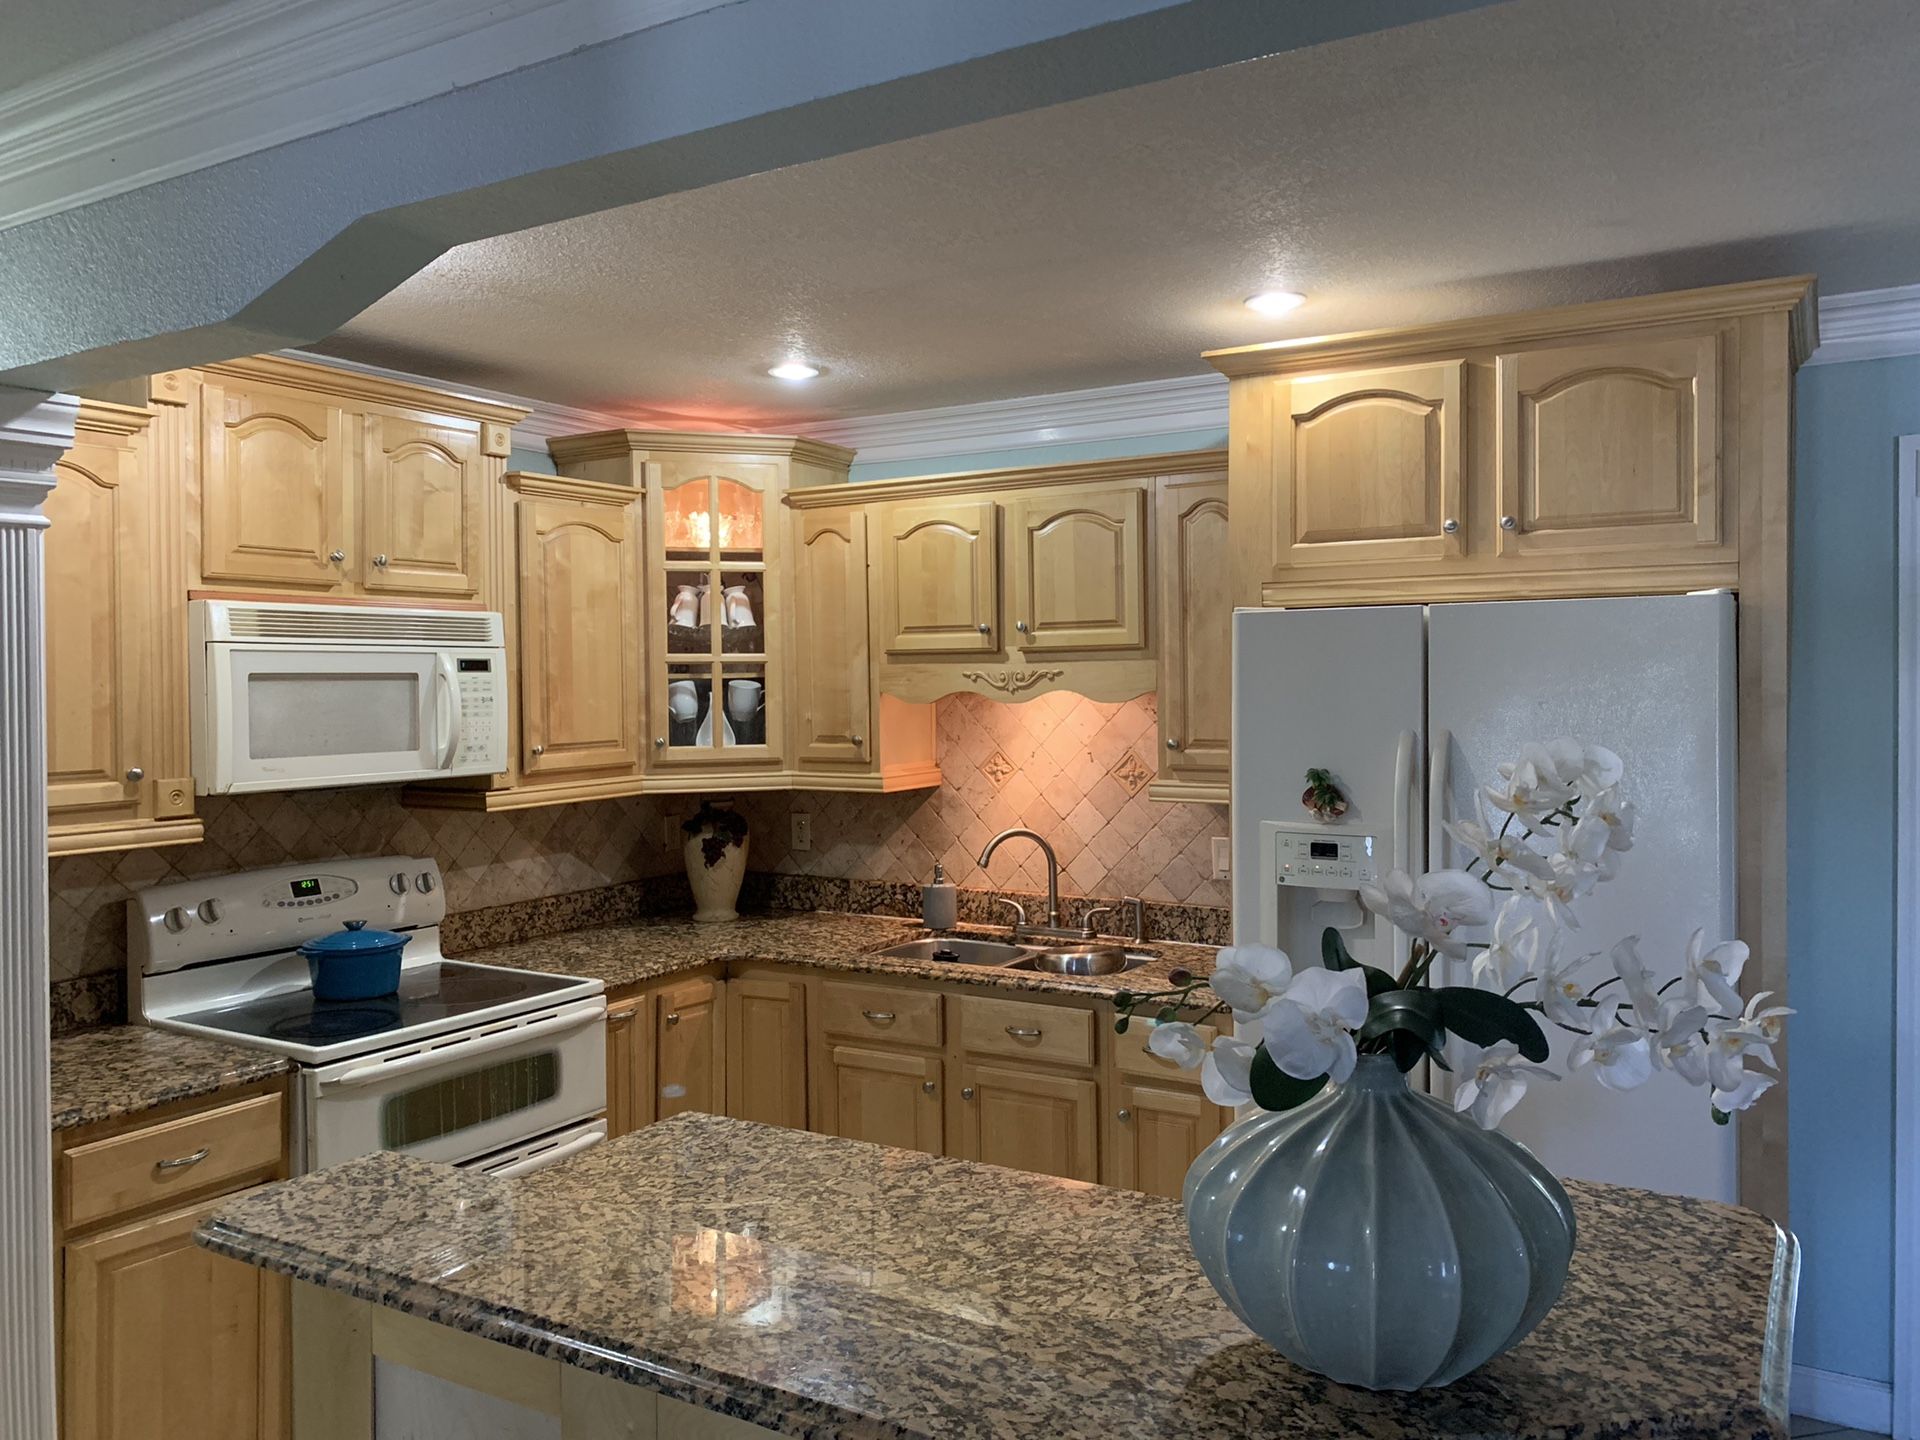 Whole solid wood kitchen cabinets and granite counter top